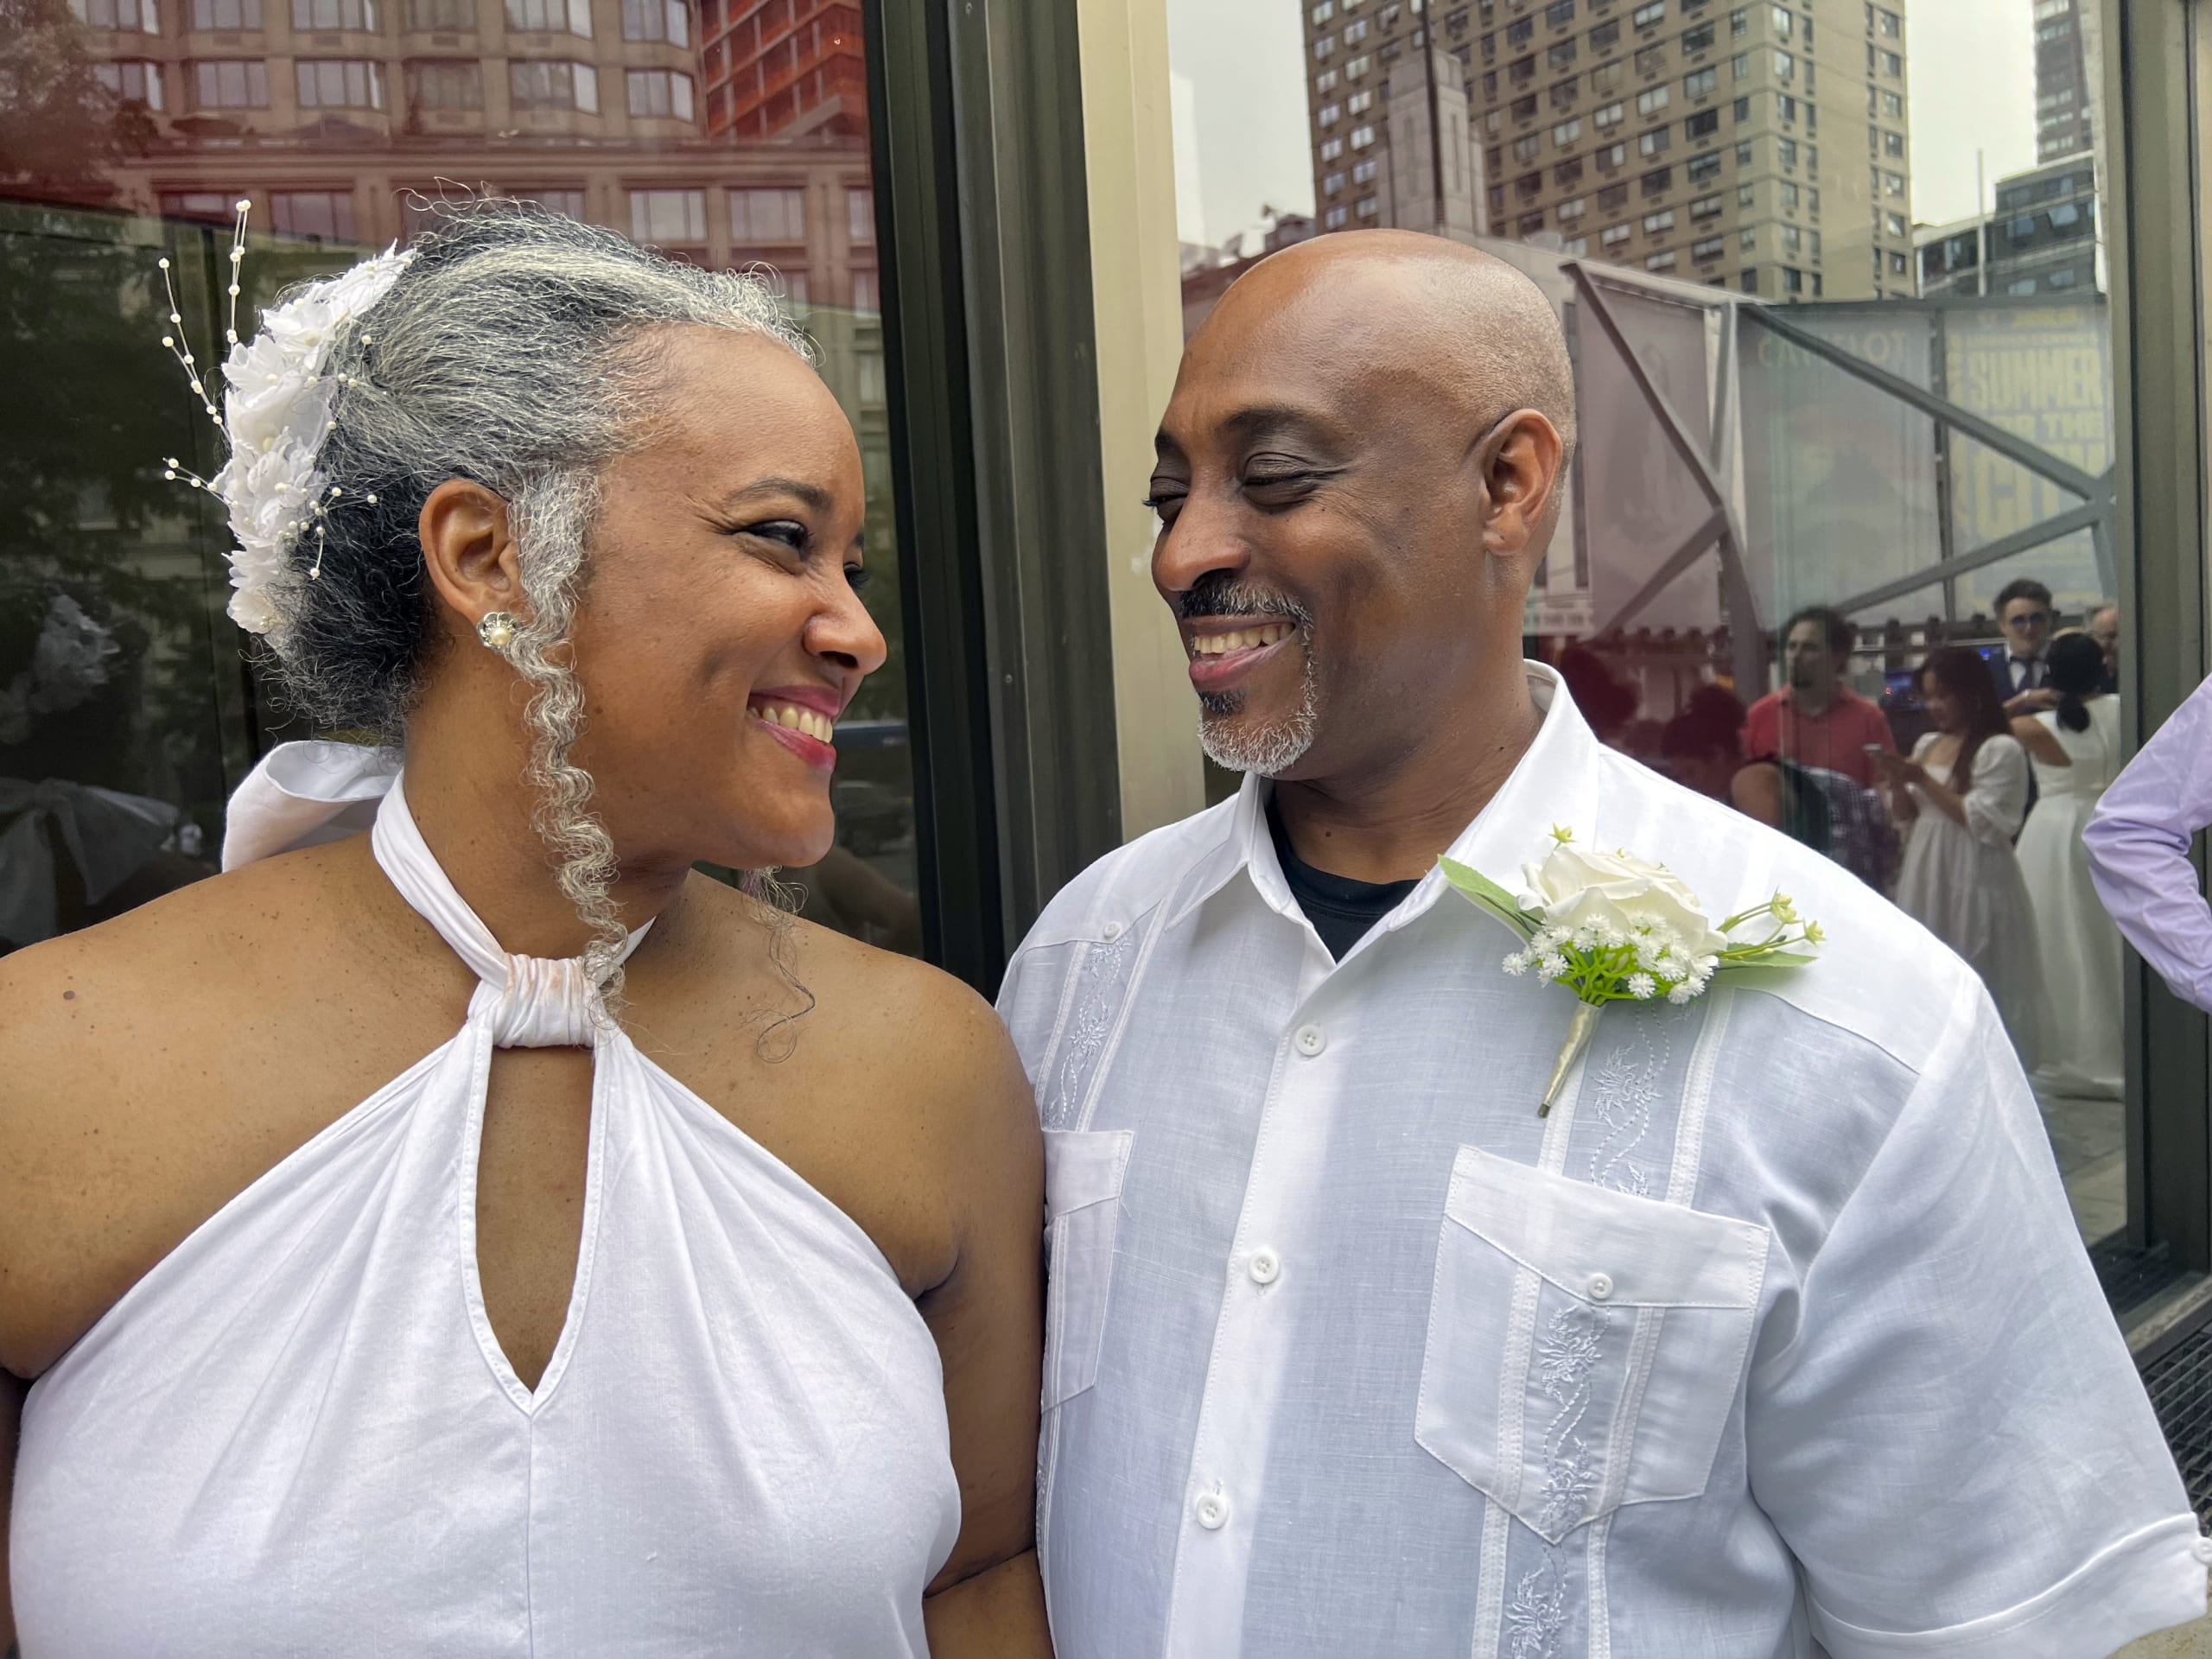 700 couples exchange vows in New York mass wedding